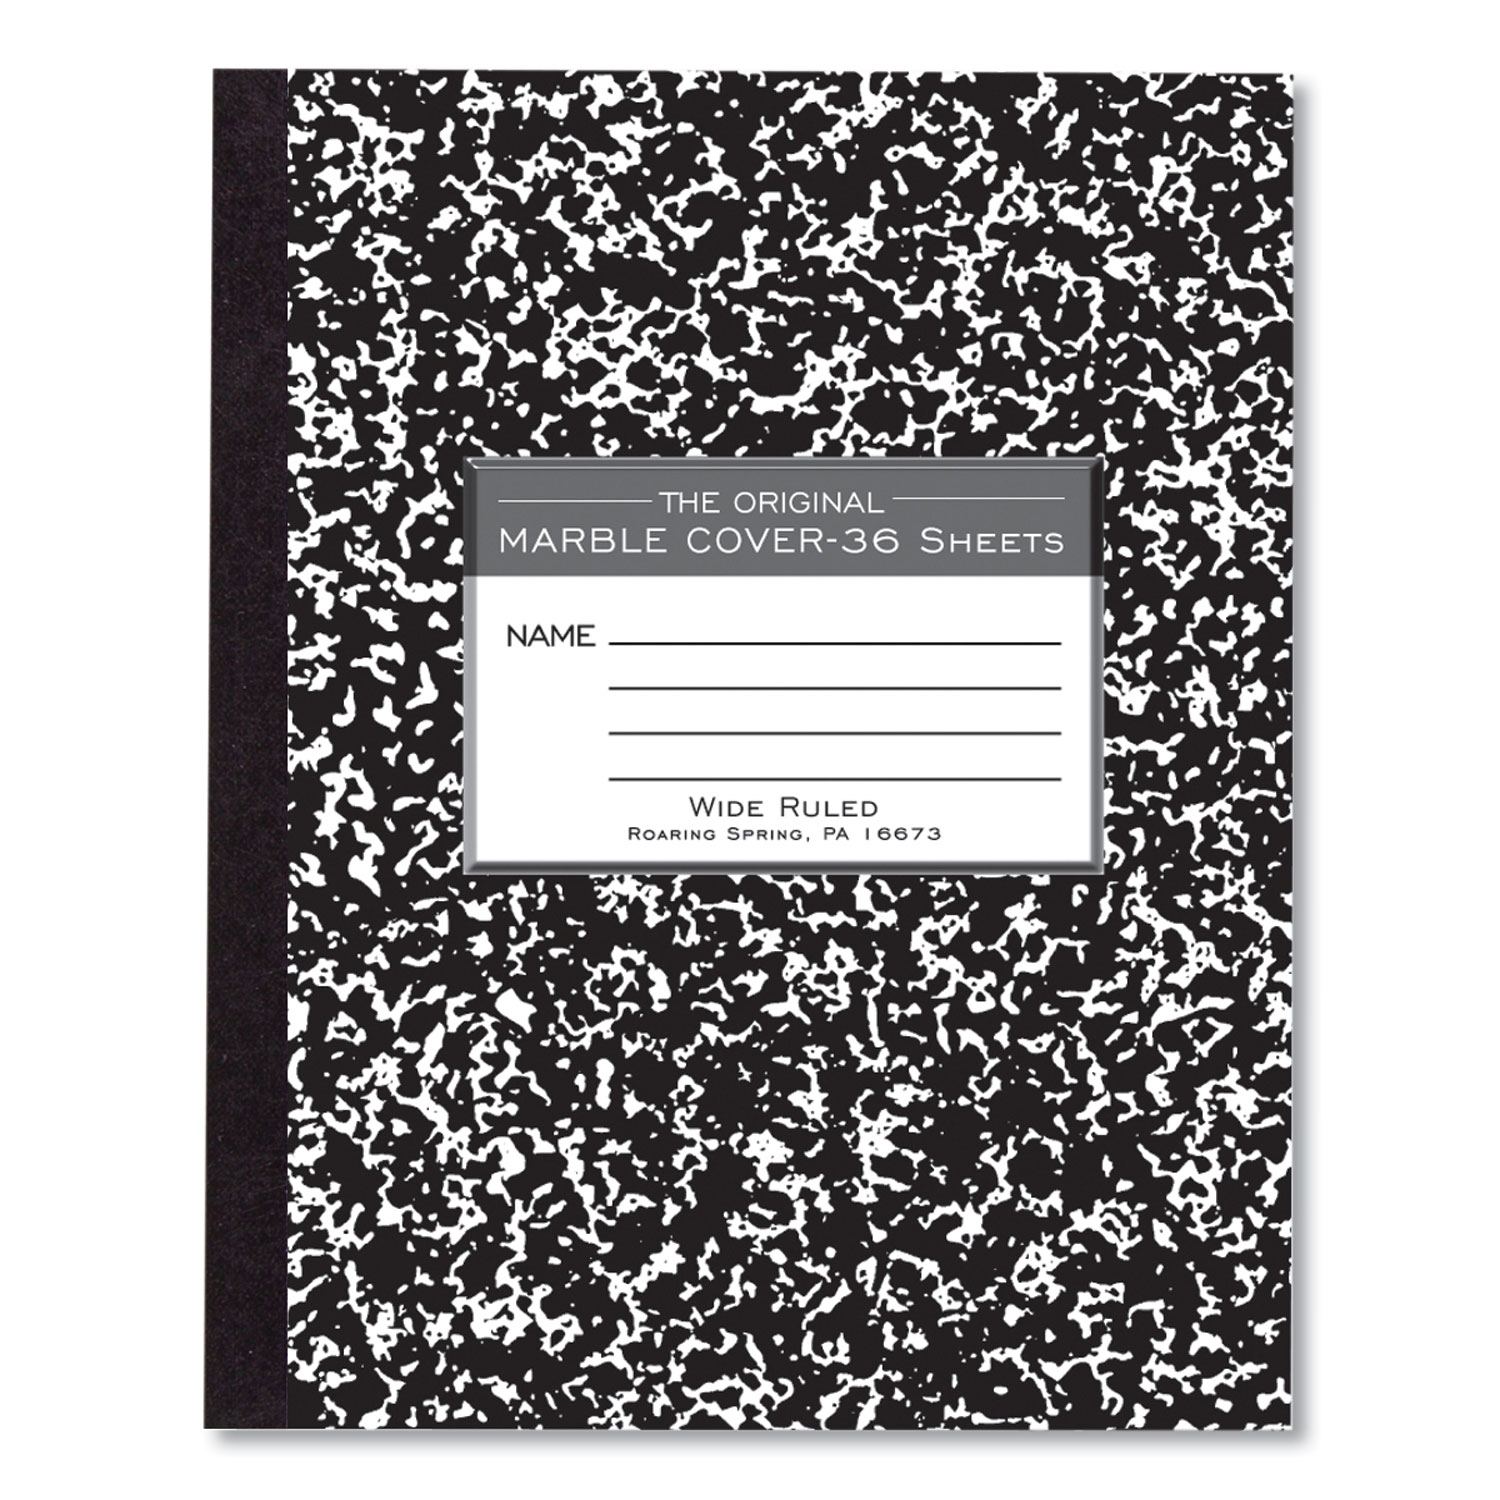 Spiral Notebook, 3-Hole Punched, 1-Subject, Wide/Legal Rule, Randomly  Assorted Cover Color, (70) 10.5 x 7.5 Sheets - Pointer Office Products